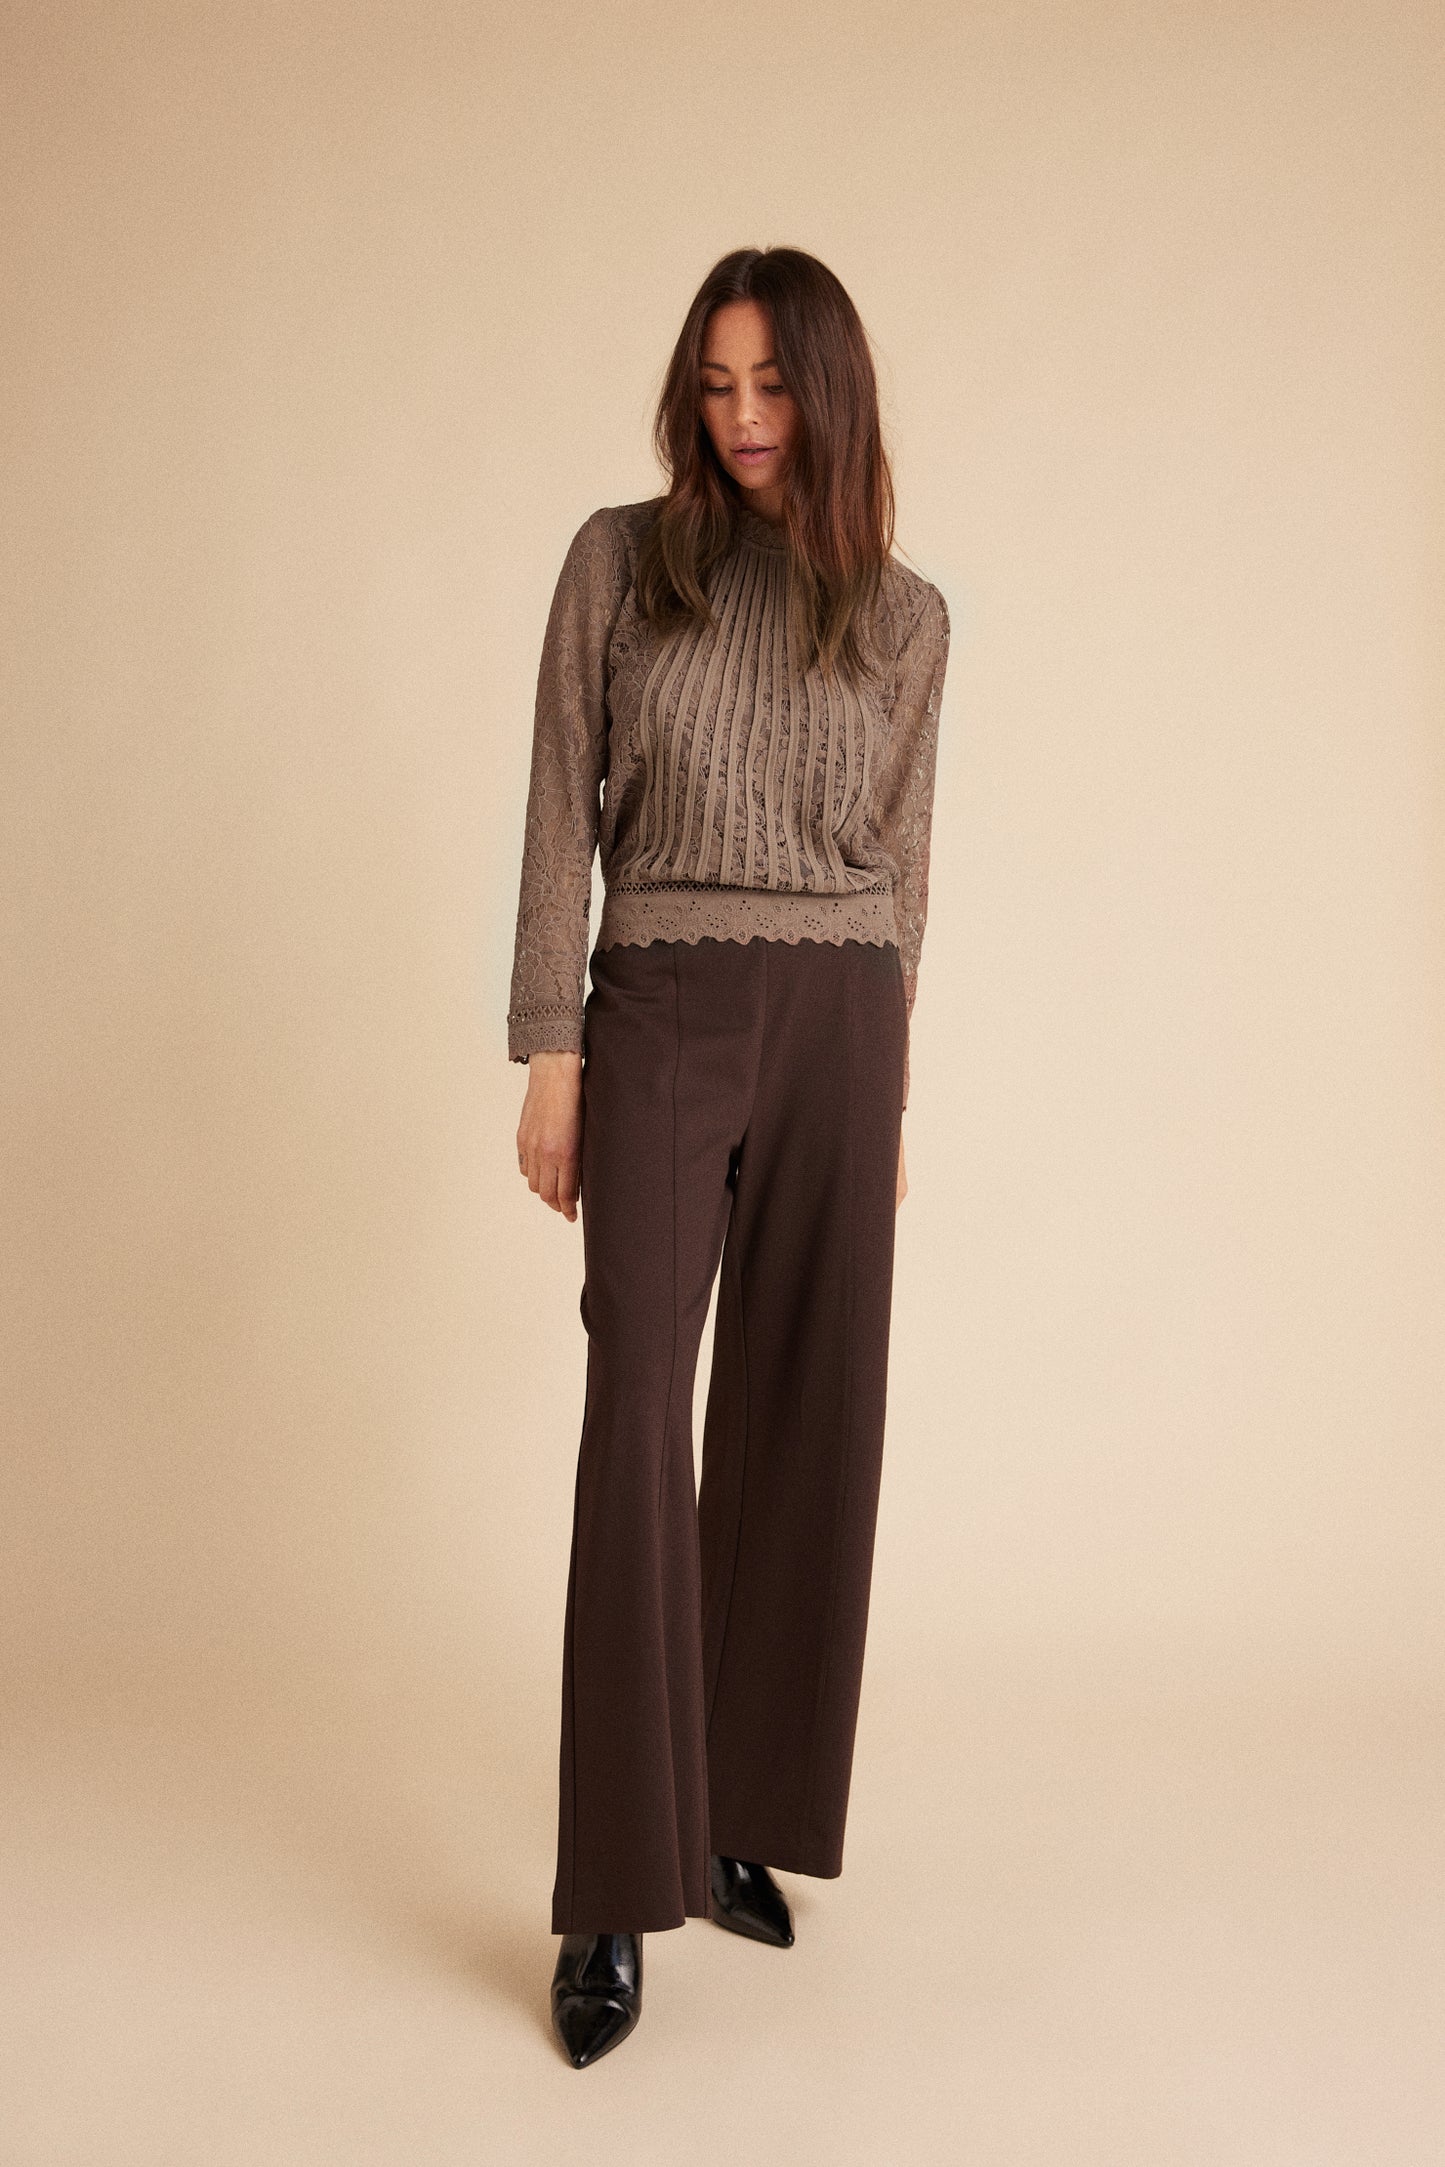 LUXZUZ // ONE TWO Beate Pant Pant 799 Choco Lux